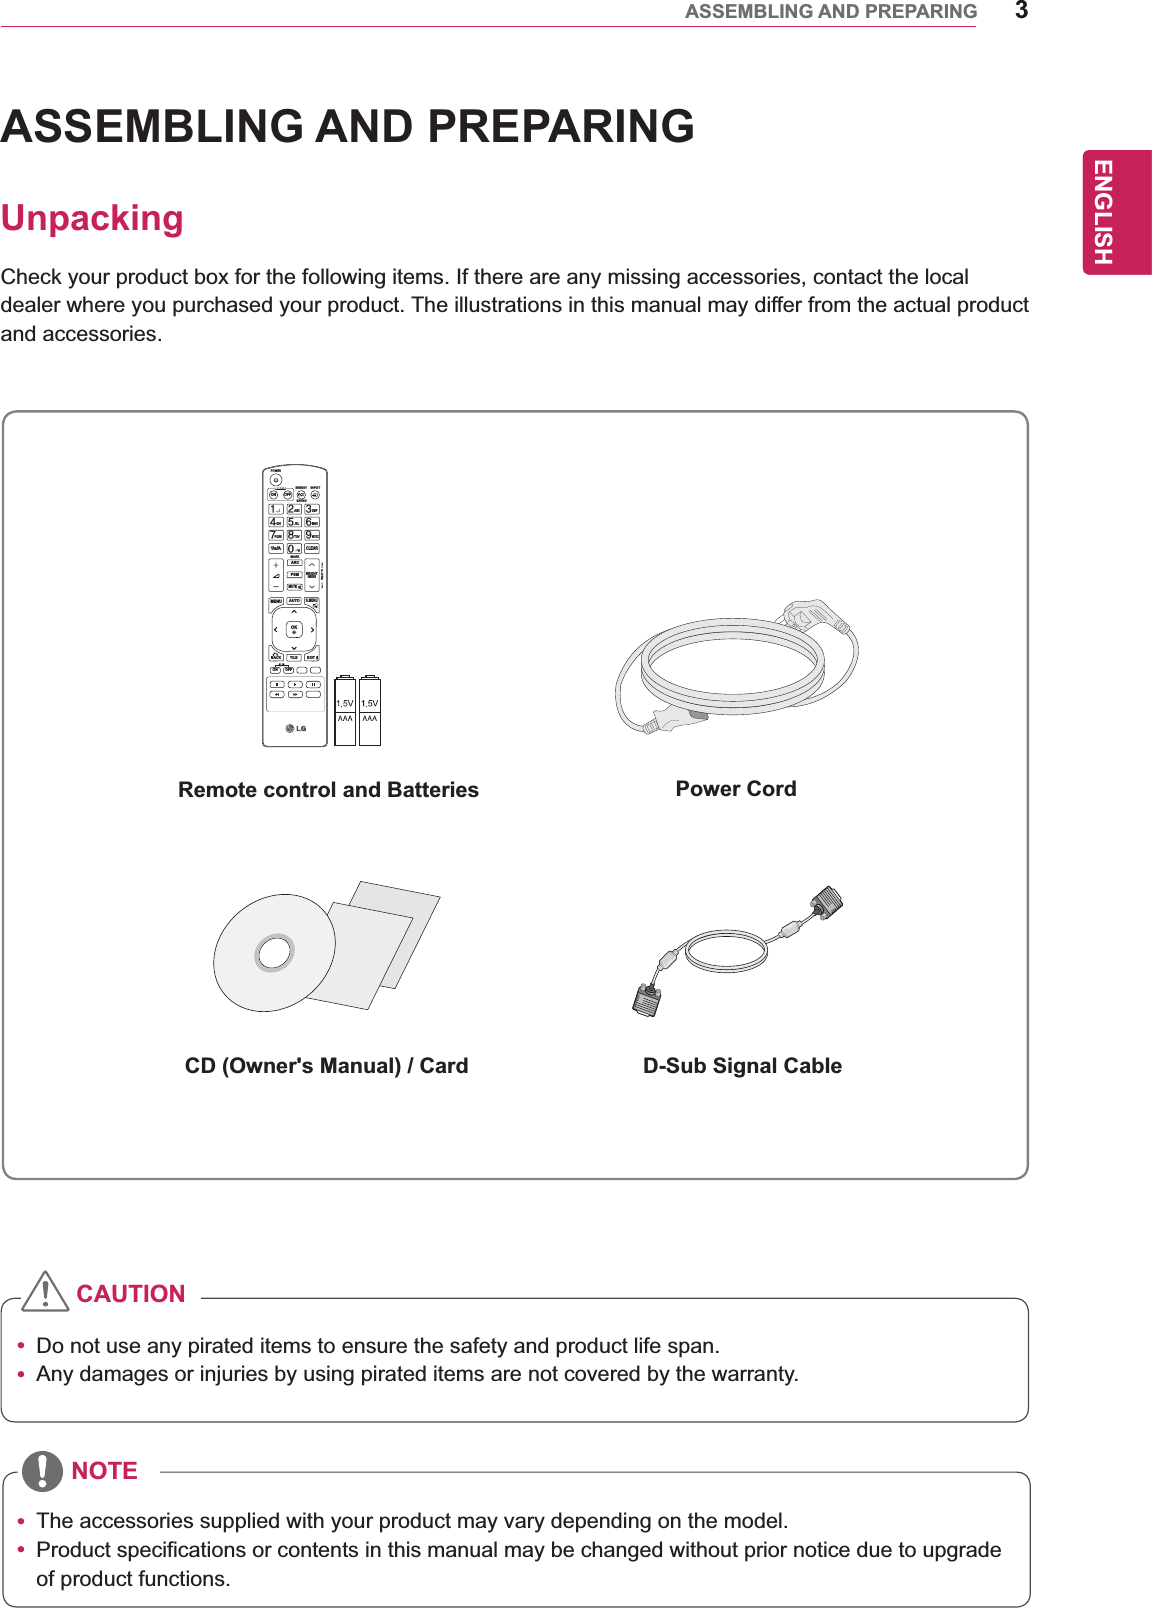 3ENGENGLISHASSEMBLING AND PREPARINGASSEMBLING AND PREPARINGUnpackingCheck your product box for the following items. If there are any missing accessories, contact the local dealer where you purchased your product. The illustrations in this manual may differ from the actual product and accessories.y Do not use any pirated items to ensure the safety and product life span.y Any damages or injuries by using pirated items are not covered by the warranty. y The accessories supplied with your product may vary depending on the model.y Product specifications or contents in this manual may be changed without prior notice due to upgrade of product functions.Remote control and Batteries Power CordCD (Owner&apos;s Manual) / Card D-Sub Signal CableCAUTIONNOTEPAGEINPUTENERGYSAVINGMARKARCONOFF. , !ABCDEFGHIJKLMNOPQRSTUV1/a/A- * #WXYZCLEARMONITORPSMAUTOMUTEBRIGHTNESSMENUPOWEROKS.MENUIDBACK TILEON OFFEXIT